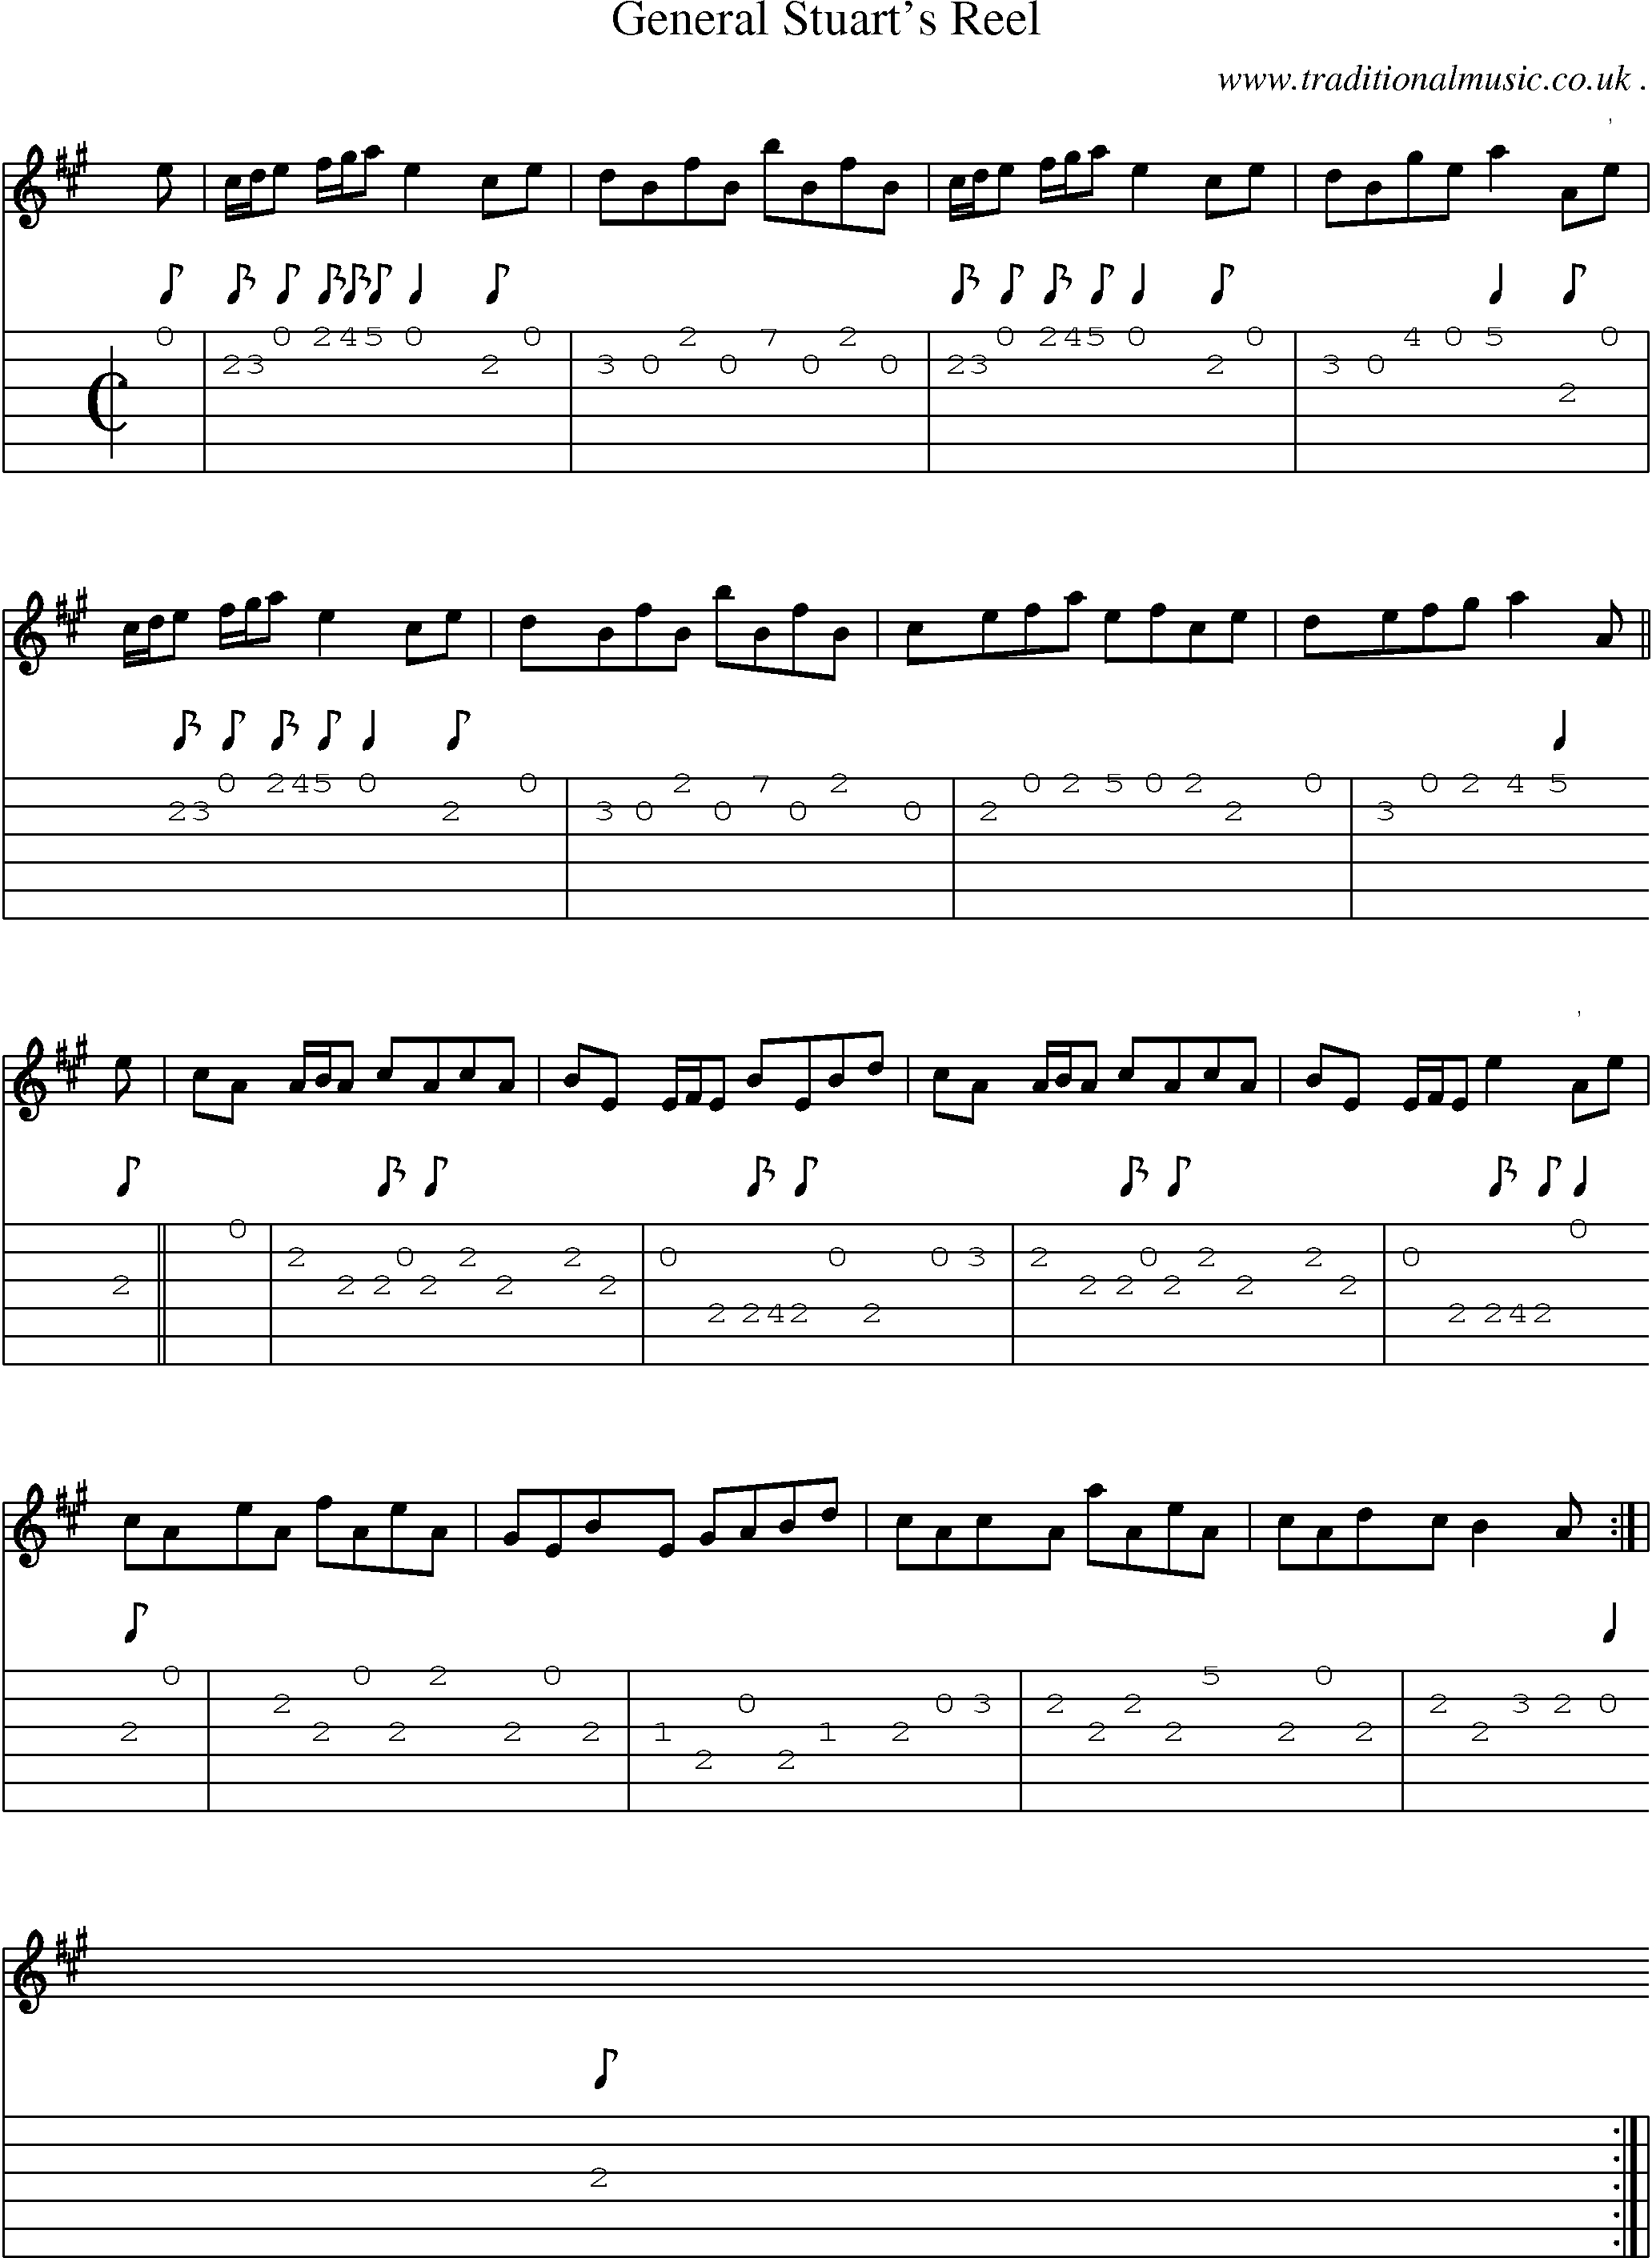 Sheet-music  score, Chords and Guitar Tabs for General Stuarts Reel